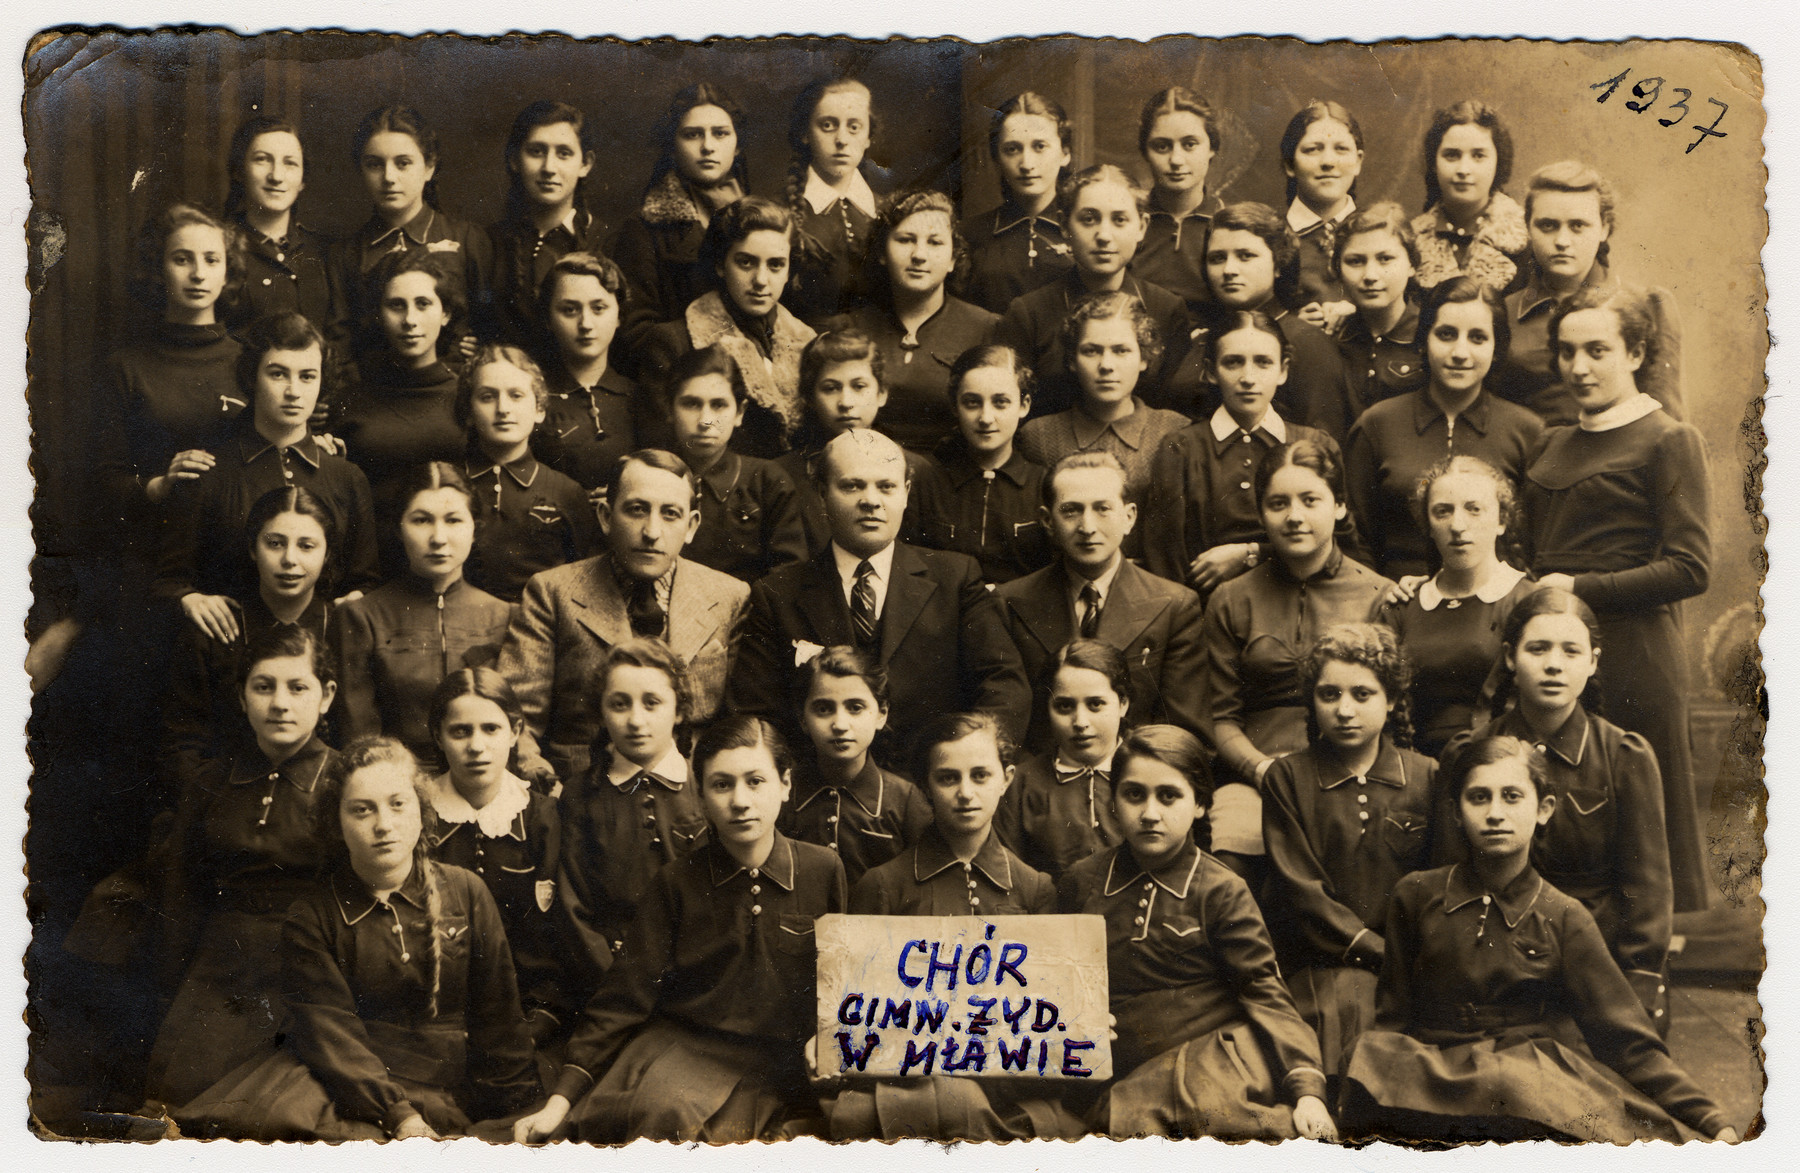 Group portrait of the choir of the Jewish gymansium in Mlawa.

Seated in the second row are the conductor Issachar Fater, Rosebery d'Arguto (real name Martin Rosenberg) and Dr. L. Rozman.